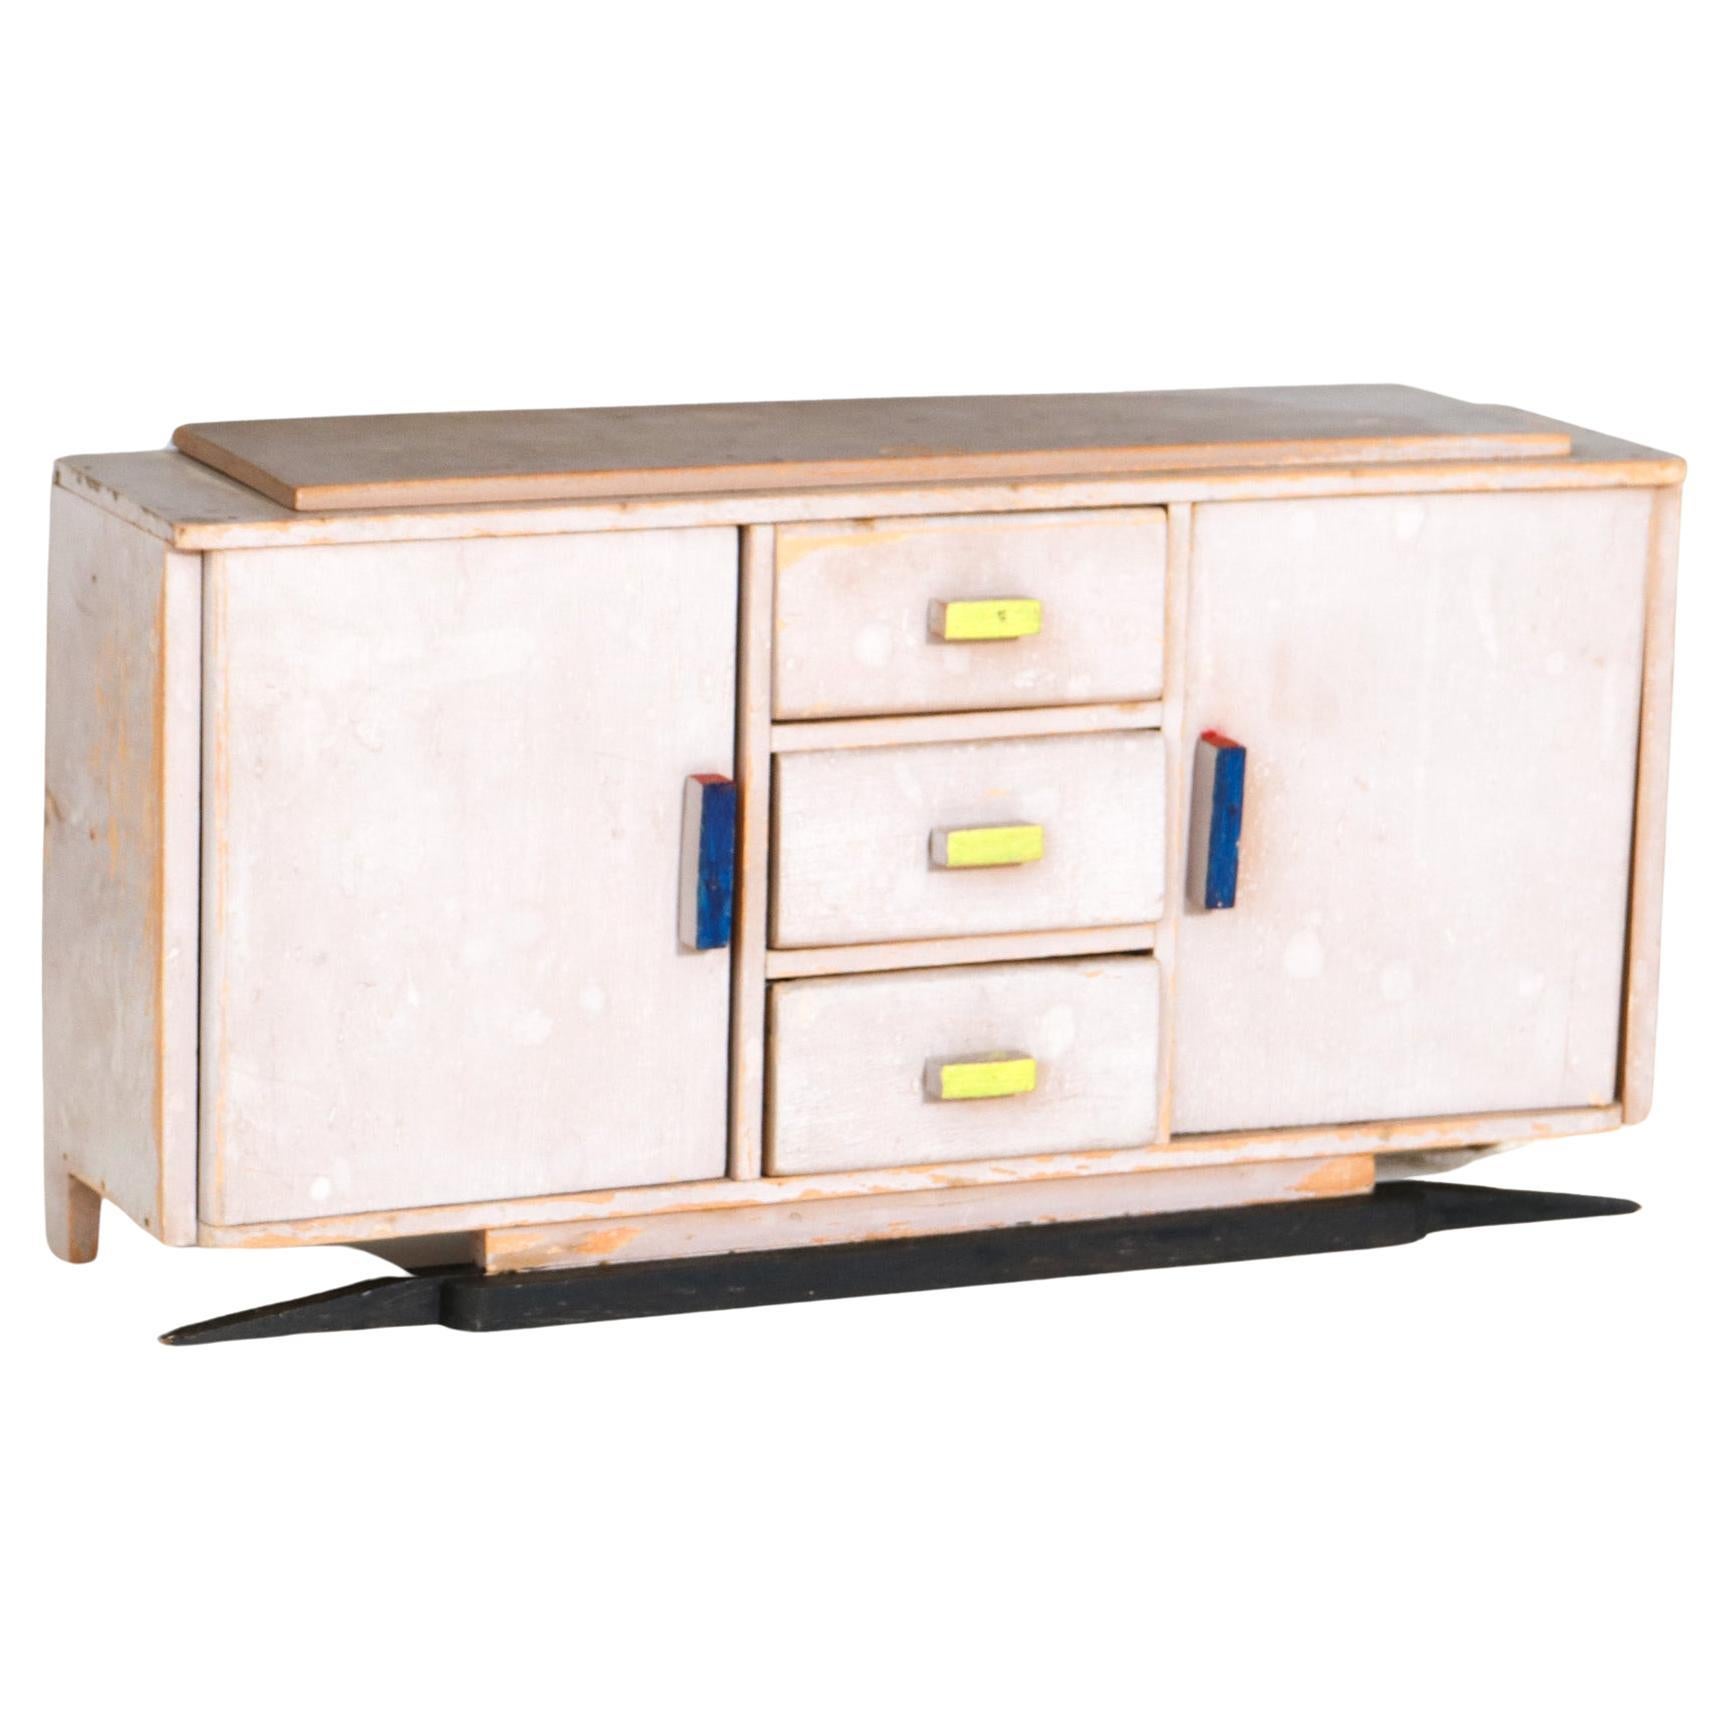 Lacquered Plywood Art Deco Modernist Children's Furniture Credenza, 1930s For Sale